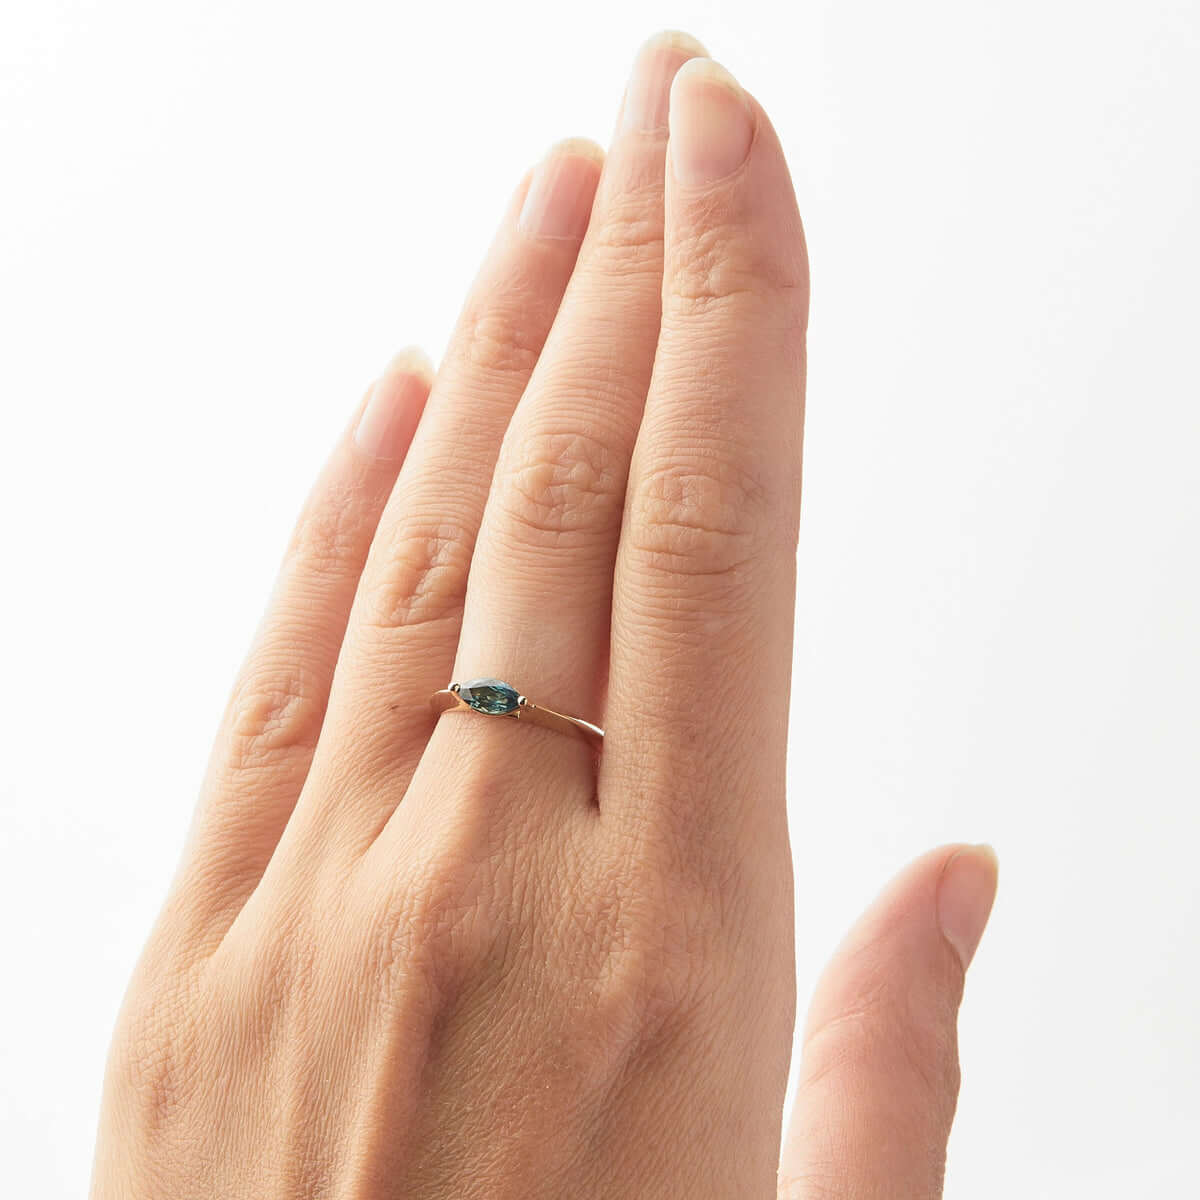 A hand model displaying a yellow gold ring with a marquise-cut Australian sapphire.